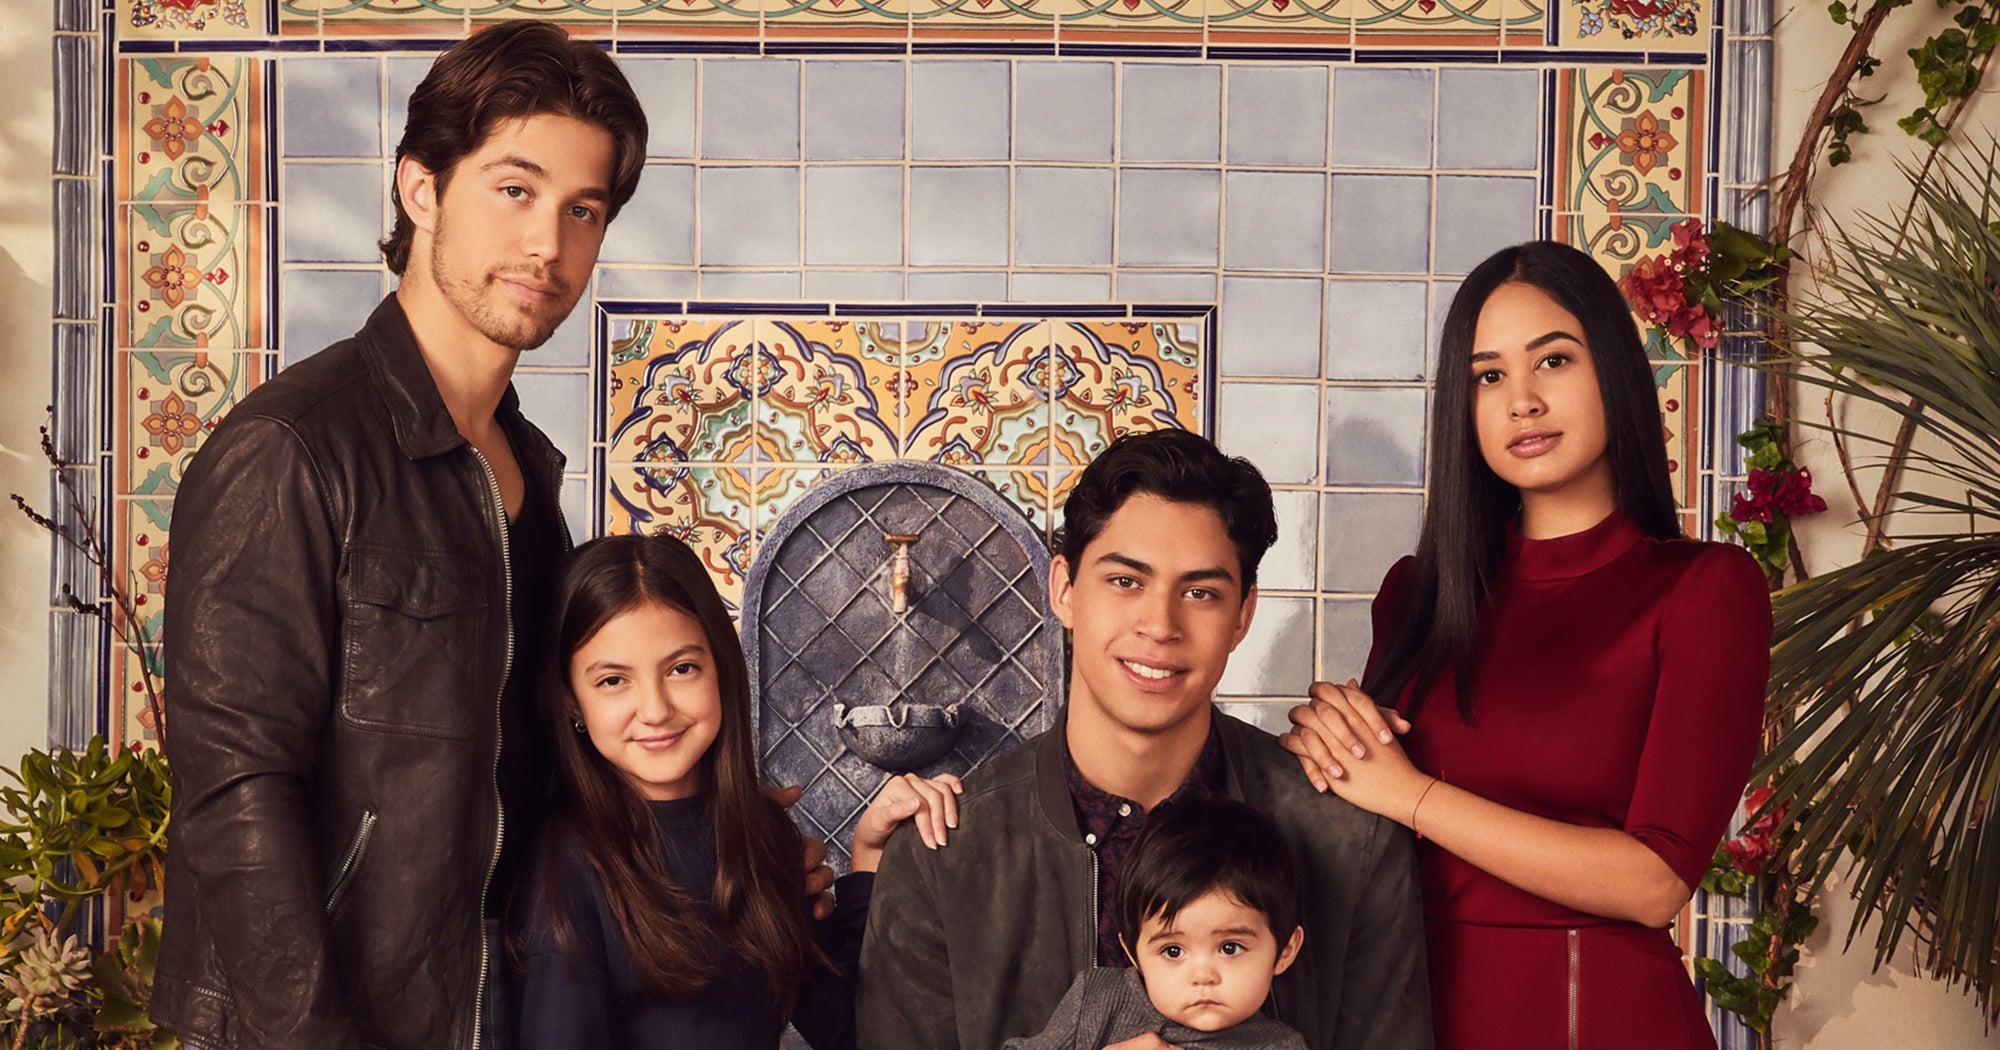 How The New Party Of Five Cast Honors The Original.